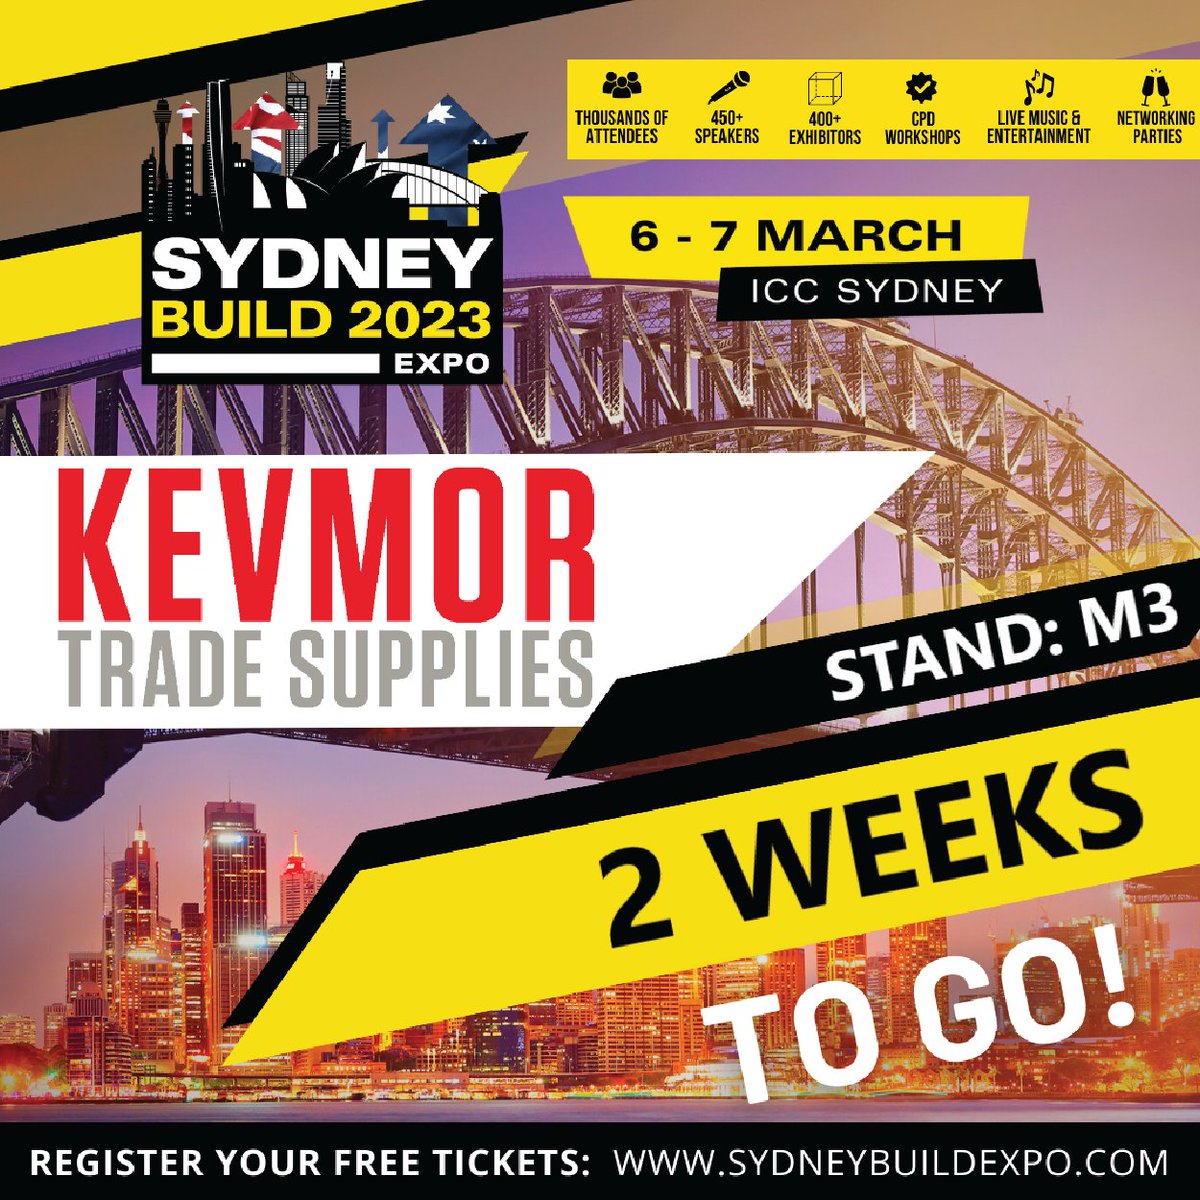 🎫 Get in quick and get your free tickets: tickets.lup.com.au/sydney-build-e…

• Australia's biggest Festival of Construction
• 450+ inspiring speakers
• 400+ exhibitors
• 37,000+ registered visitors

👷🏼‍♂️👷🏼‍♀️ FIND US AT STAND M3

#kevmor #sydneybuild #expo #2023 #iccsydney